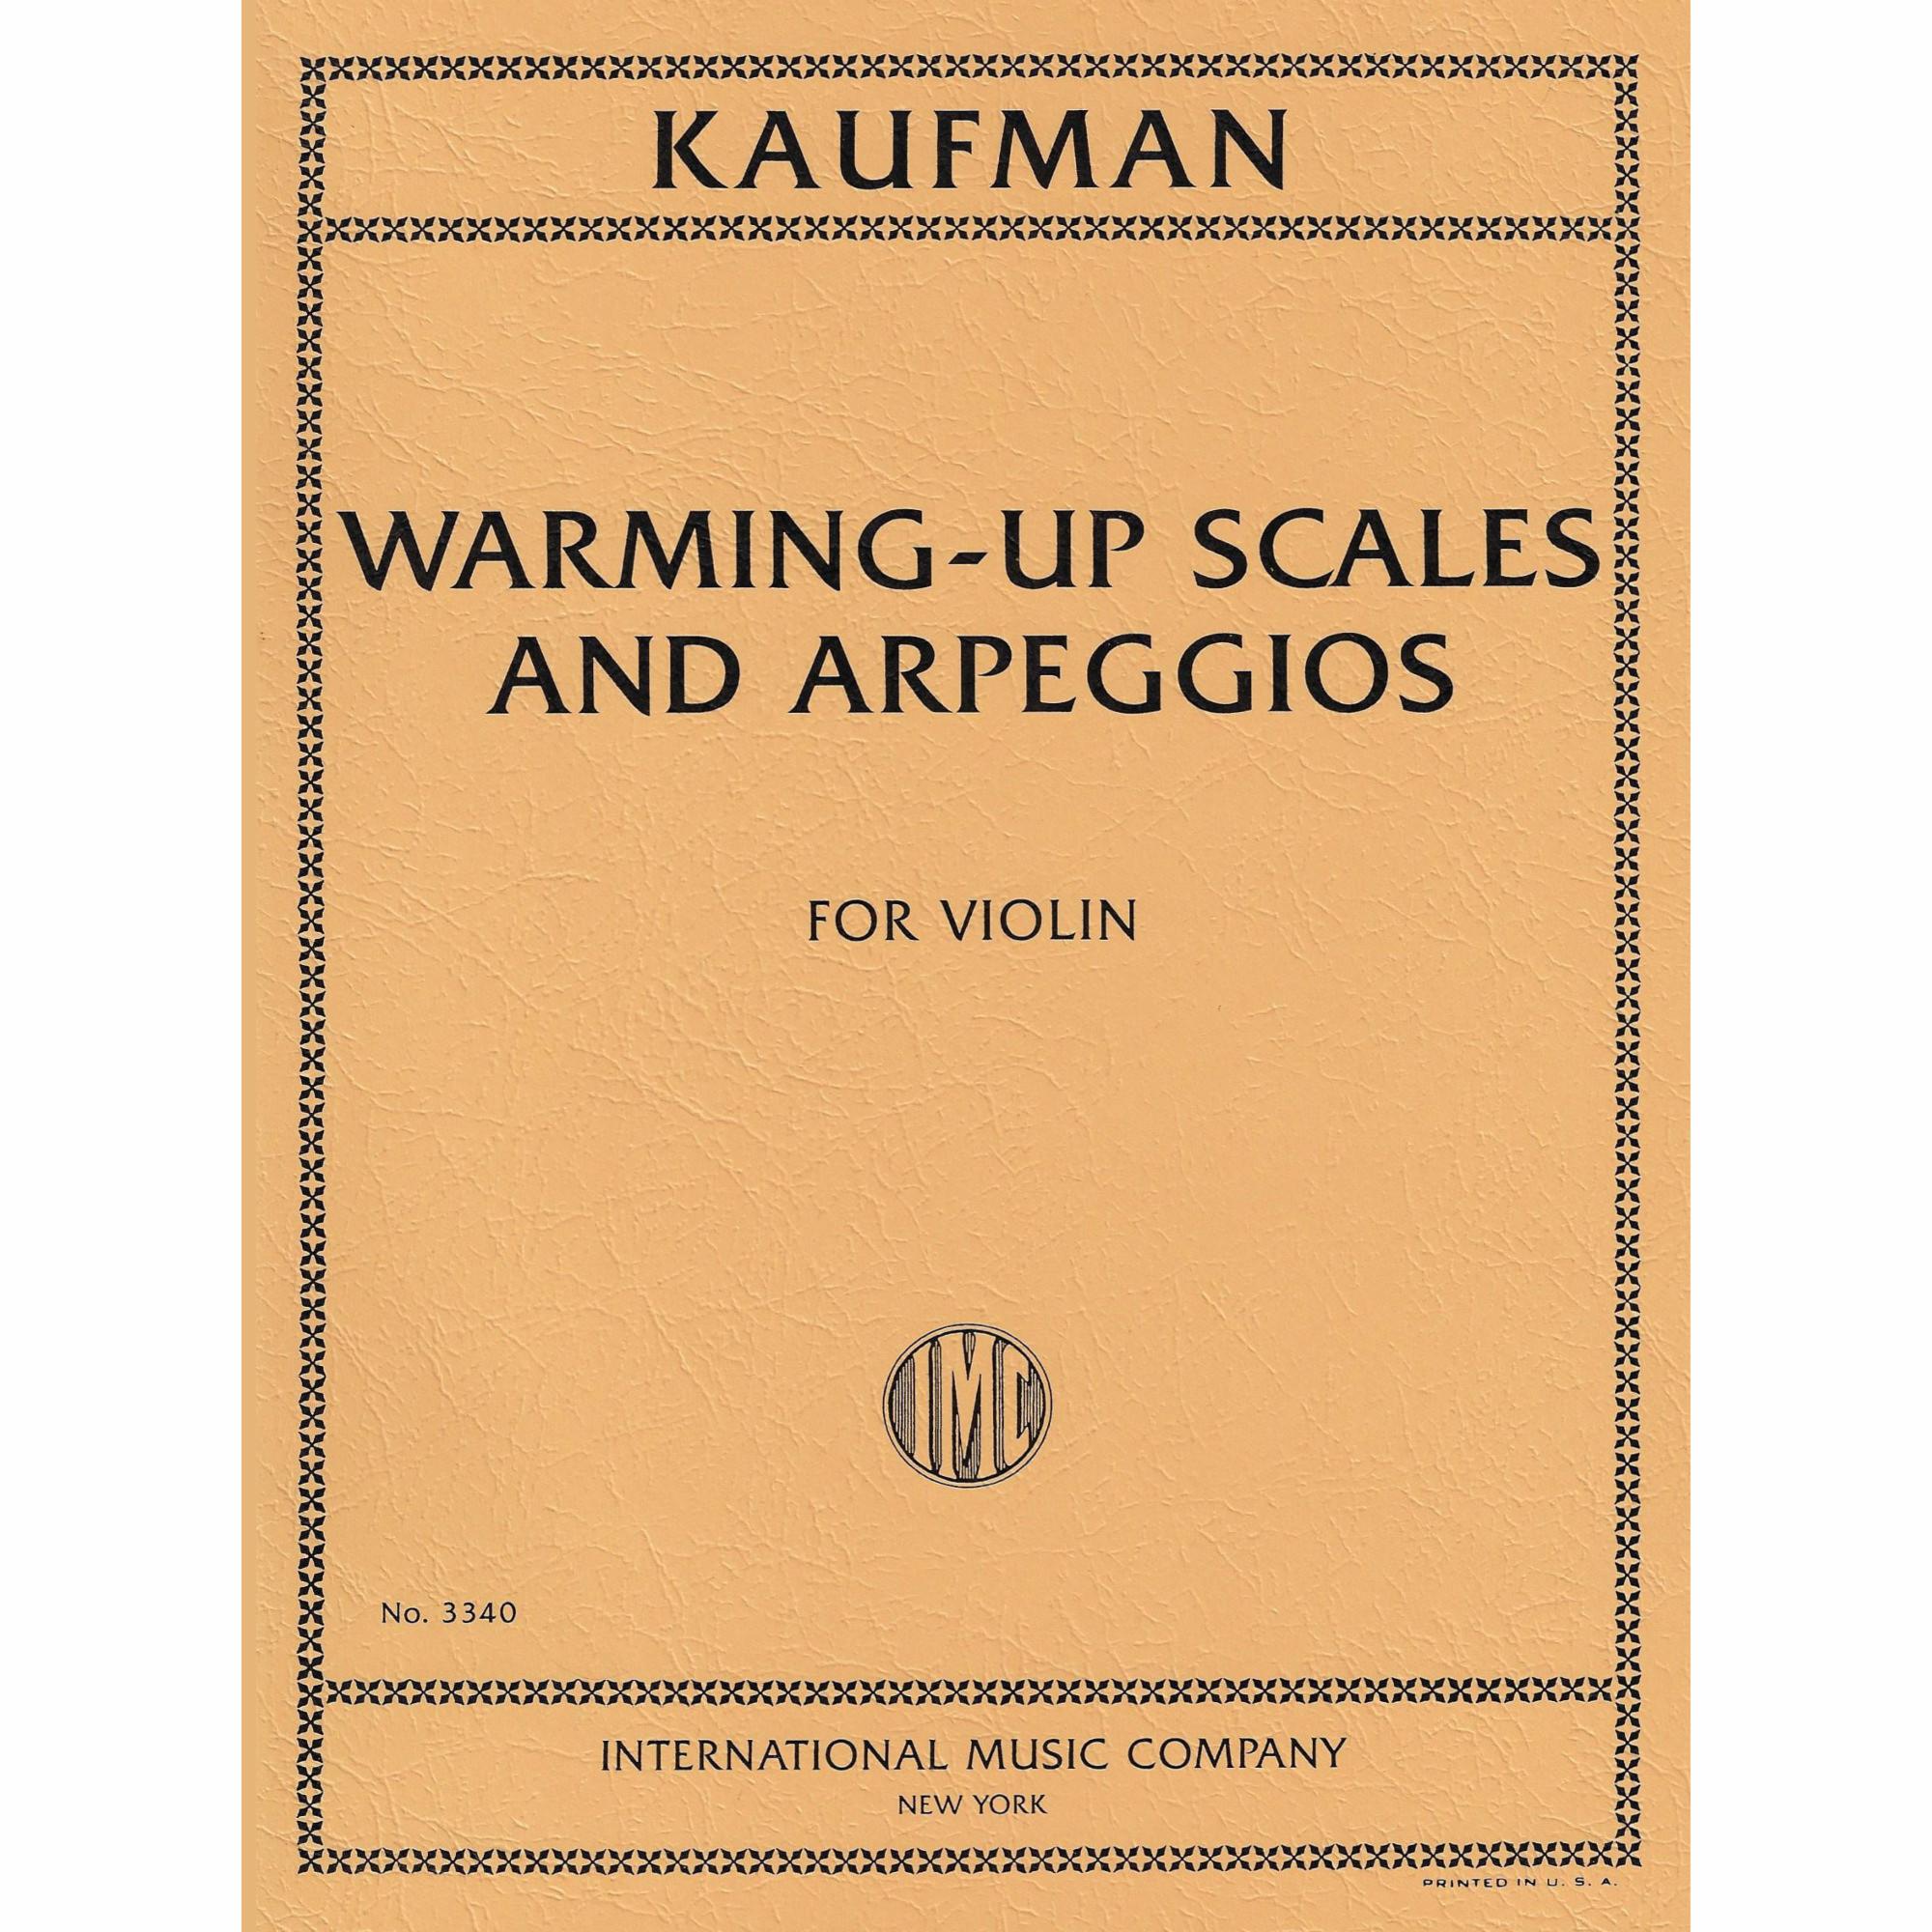 Kaufman -- Warming-Up Scales and Arpeggios for Violin